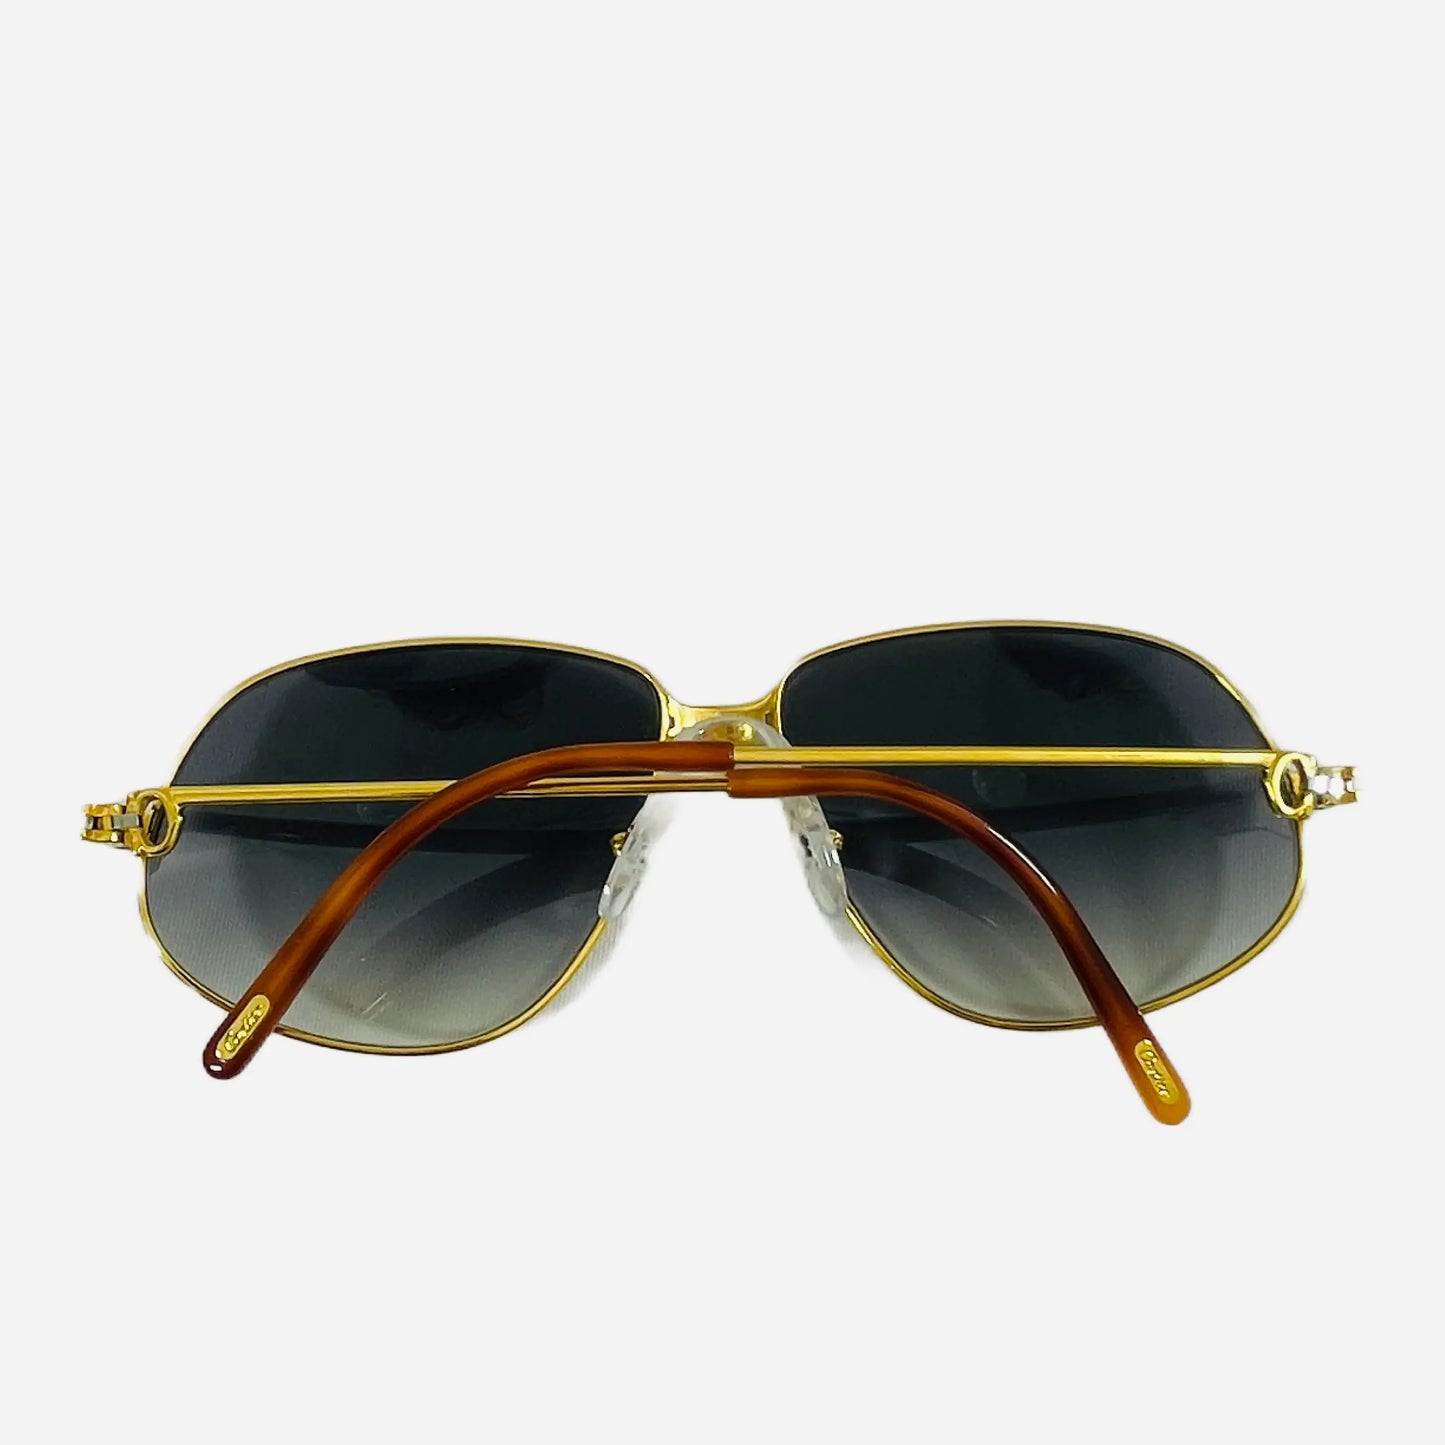 Vintage-Cartier-Panthere-Sonnenbrille-Sunglasses-G.M.-22CT-Gold-Plated-back-the-seekers